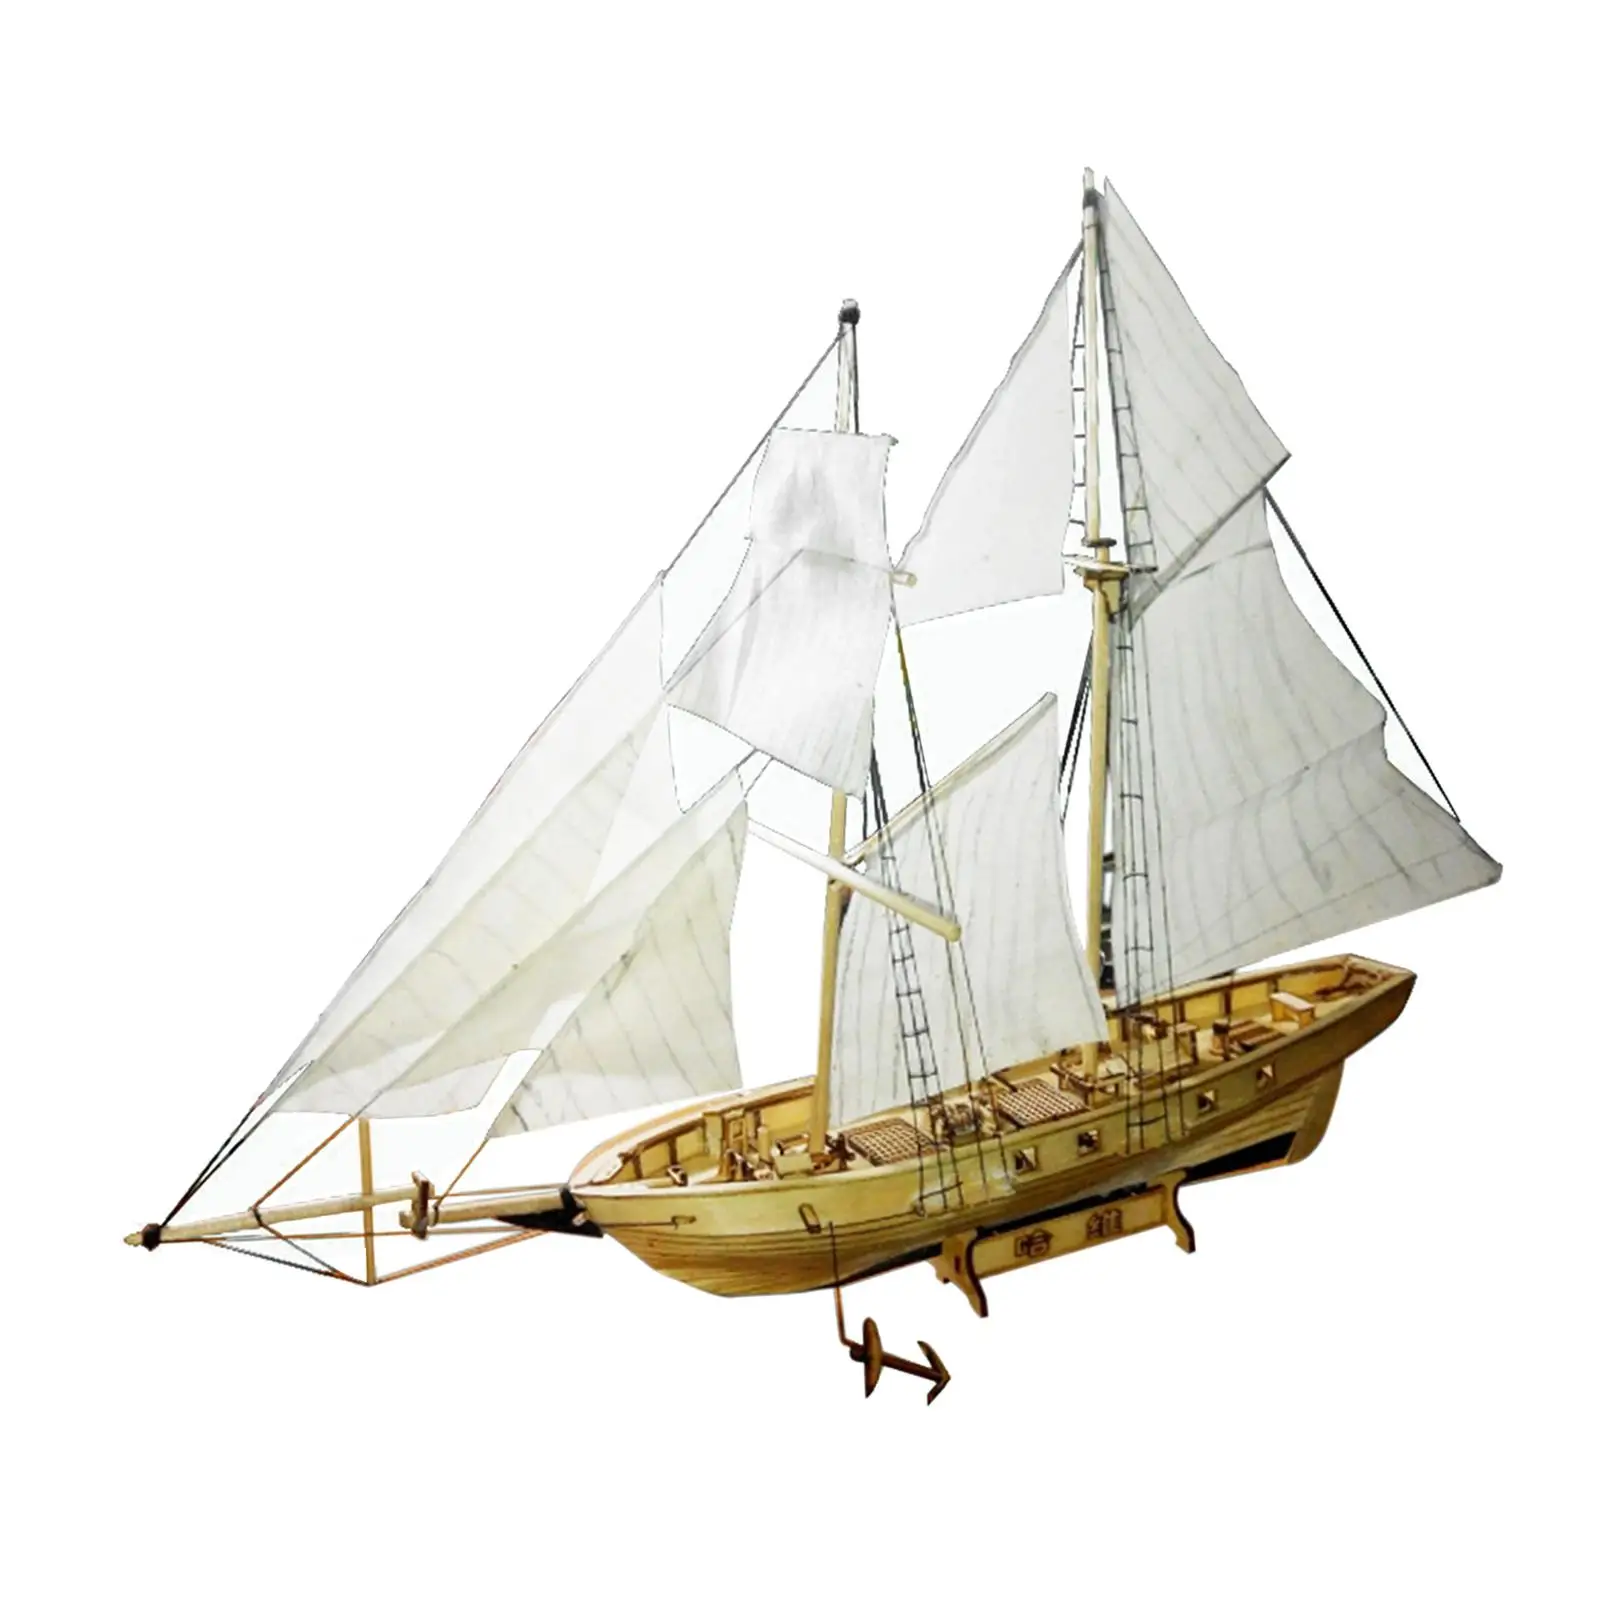 

3D Puzzle Ship Craft Fun Unfinished Crafting Wooden Sailboat Sailing Model for Office Home Living Room Kids Teaching Exhibition